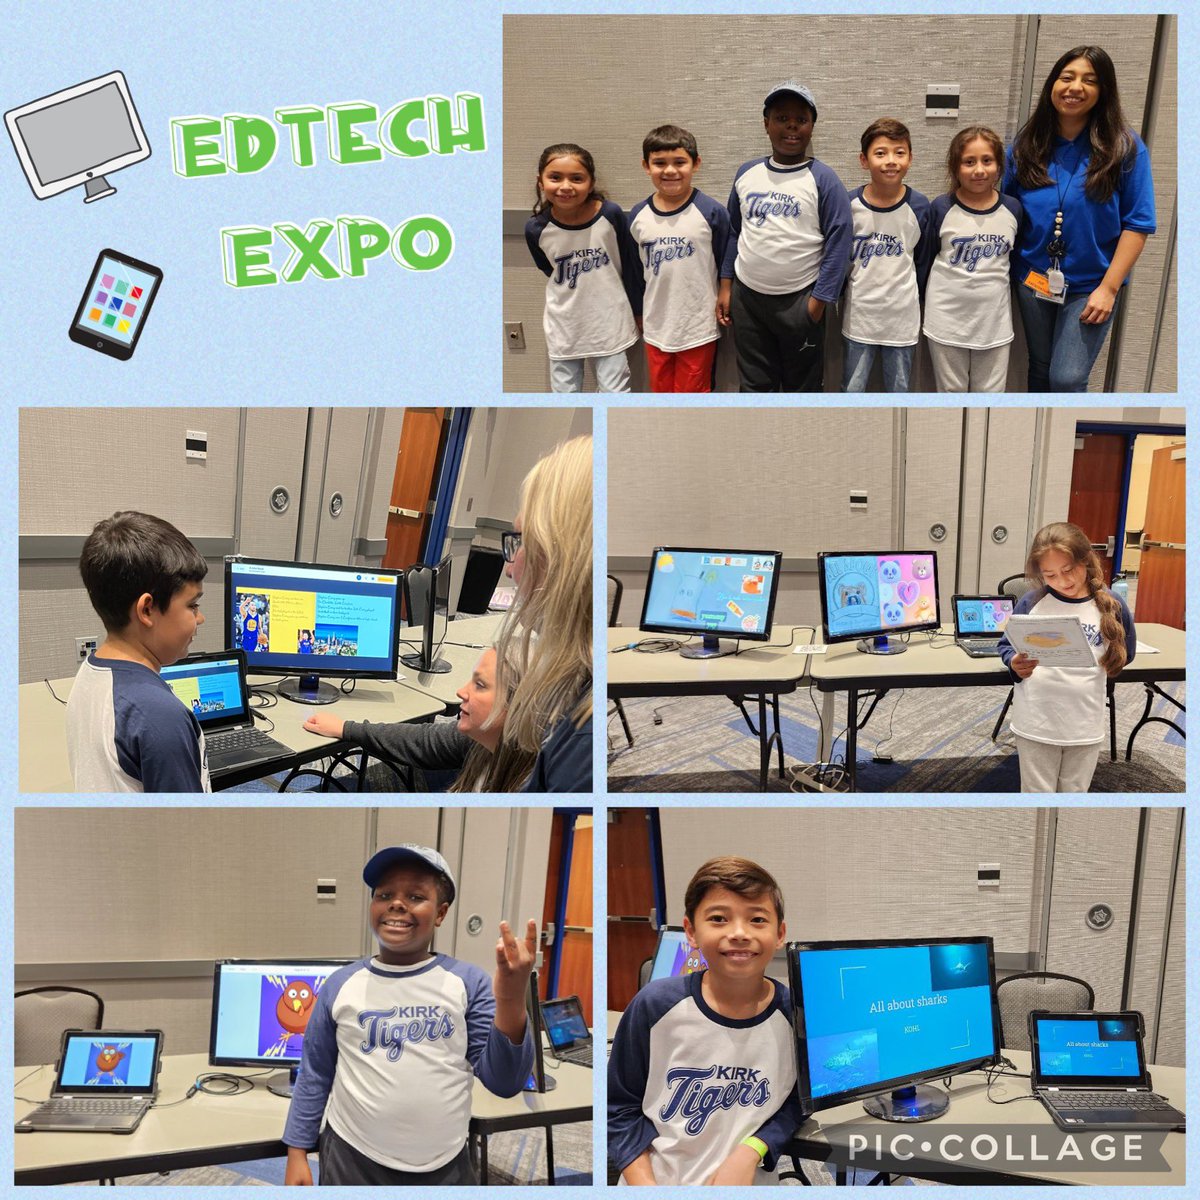 I am very proud of these 2nd grade mighty tigers for showing off their digital presentations at  @CyFairEdTech Expo! @KirkElementary #KirkCan #2ndtoNone #CFISDsee